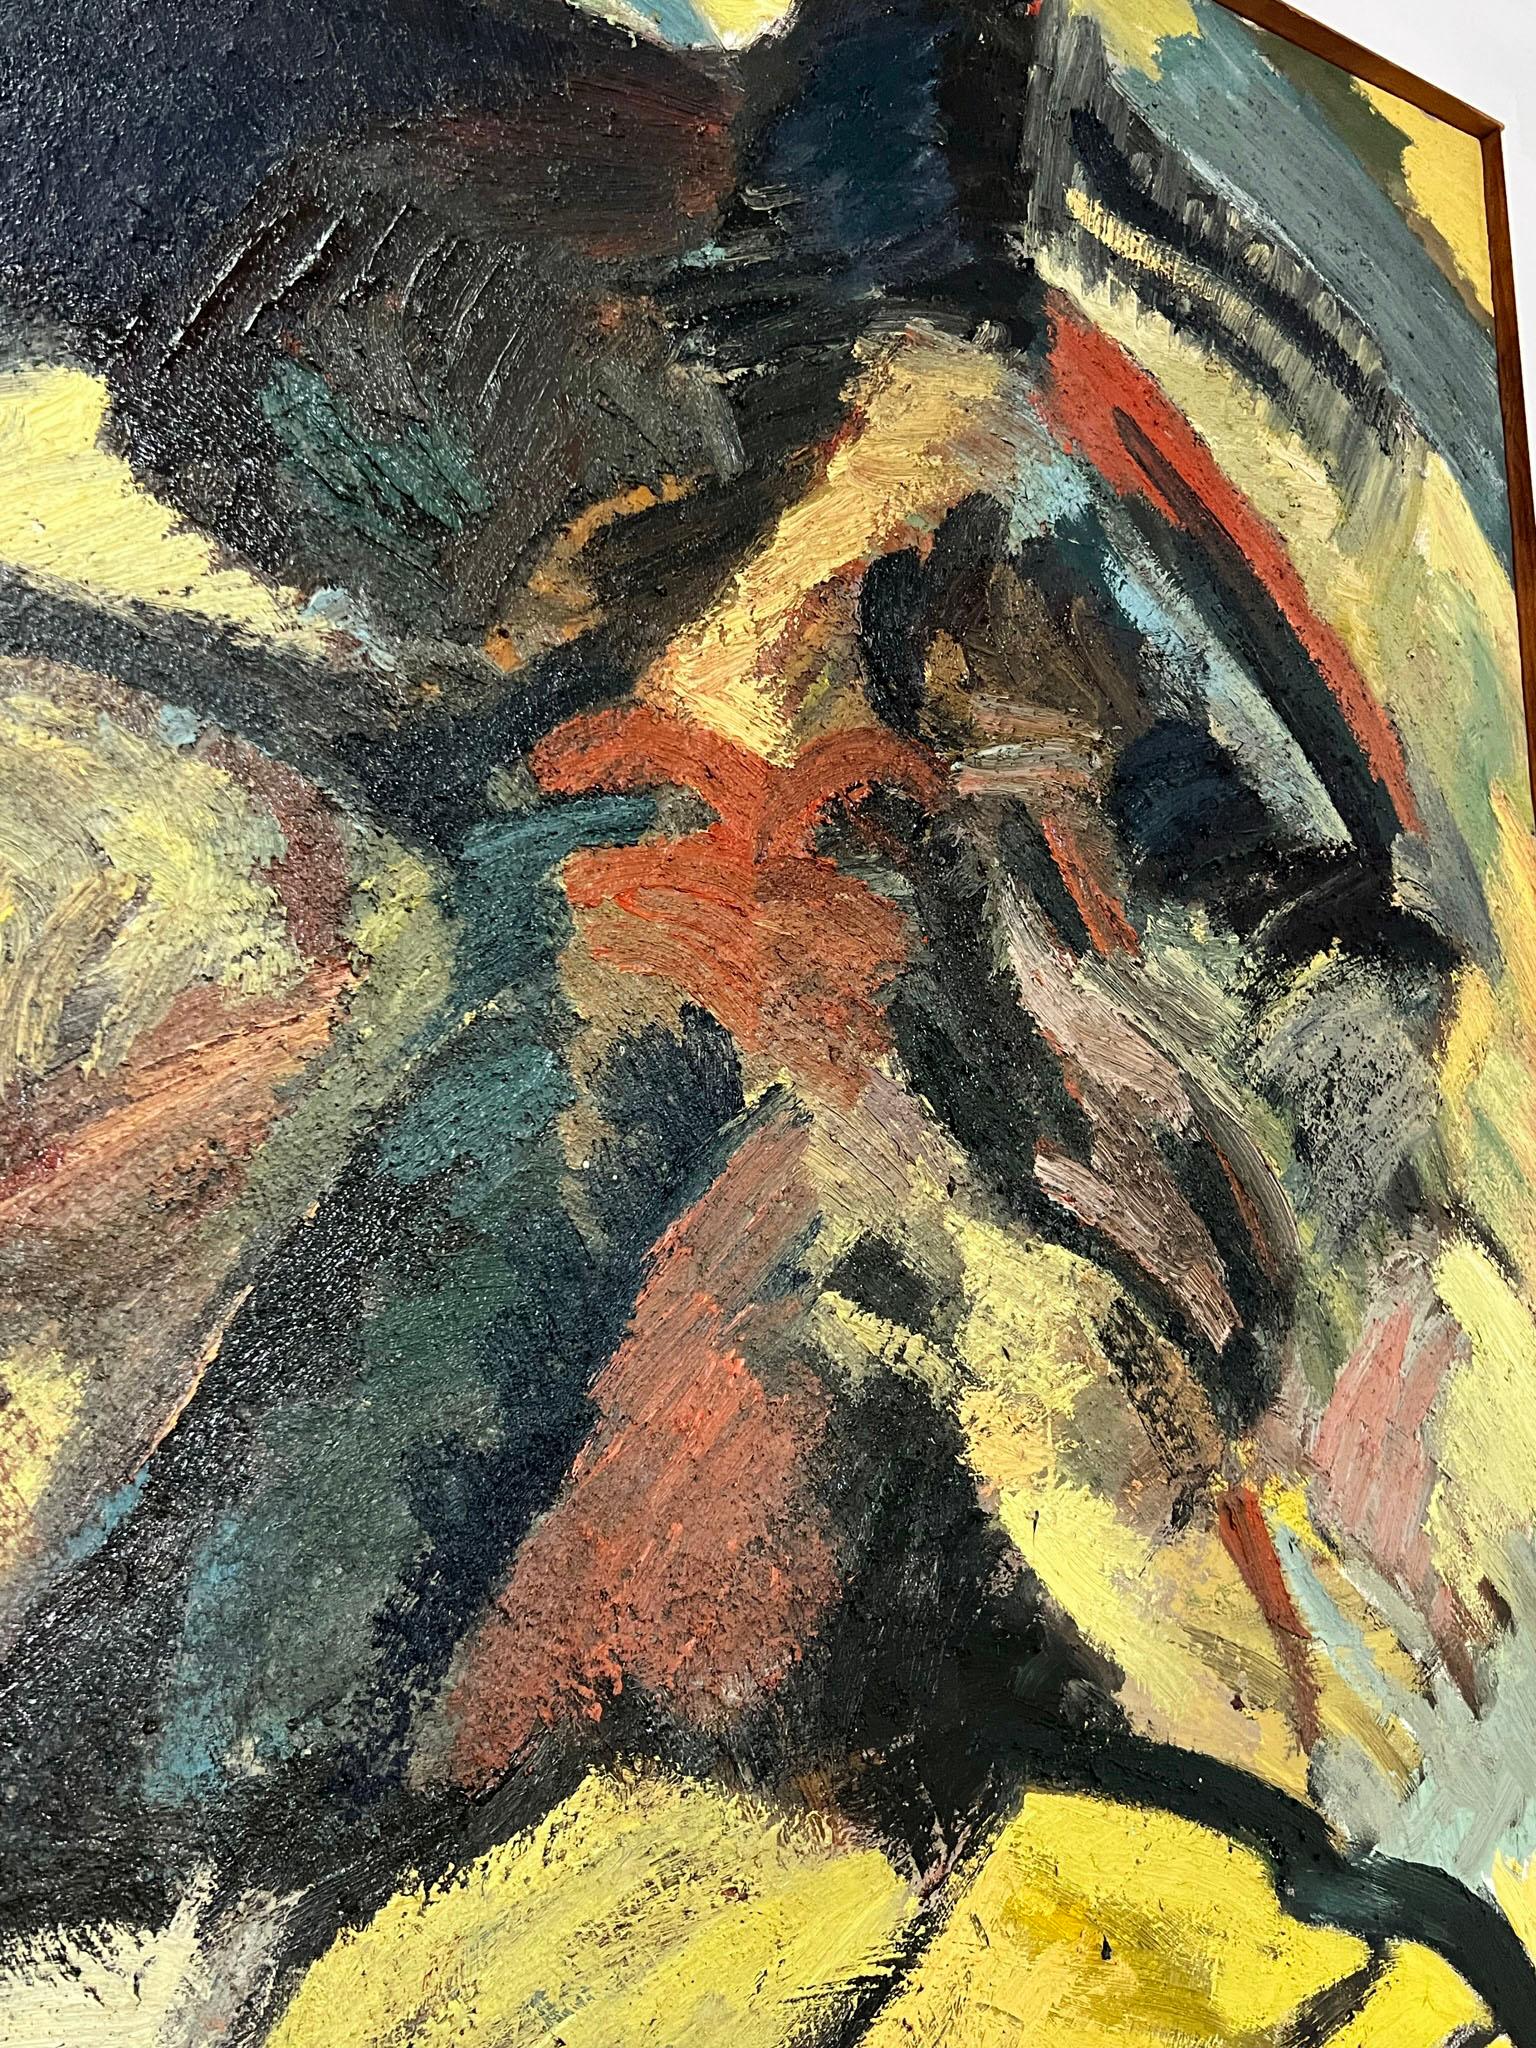 Mid-20th Century Abstract Expressionist Painting by Harvey Simons, d. 1963